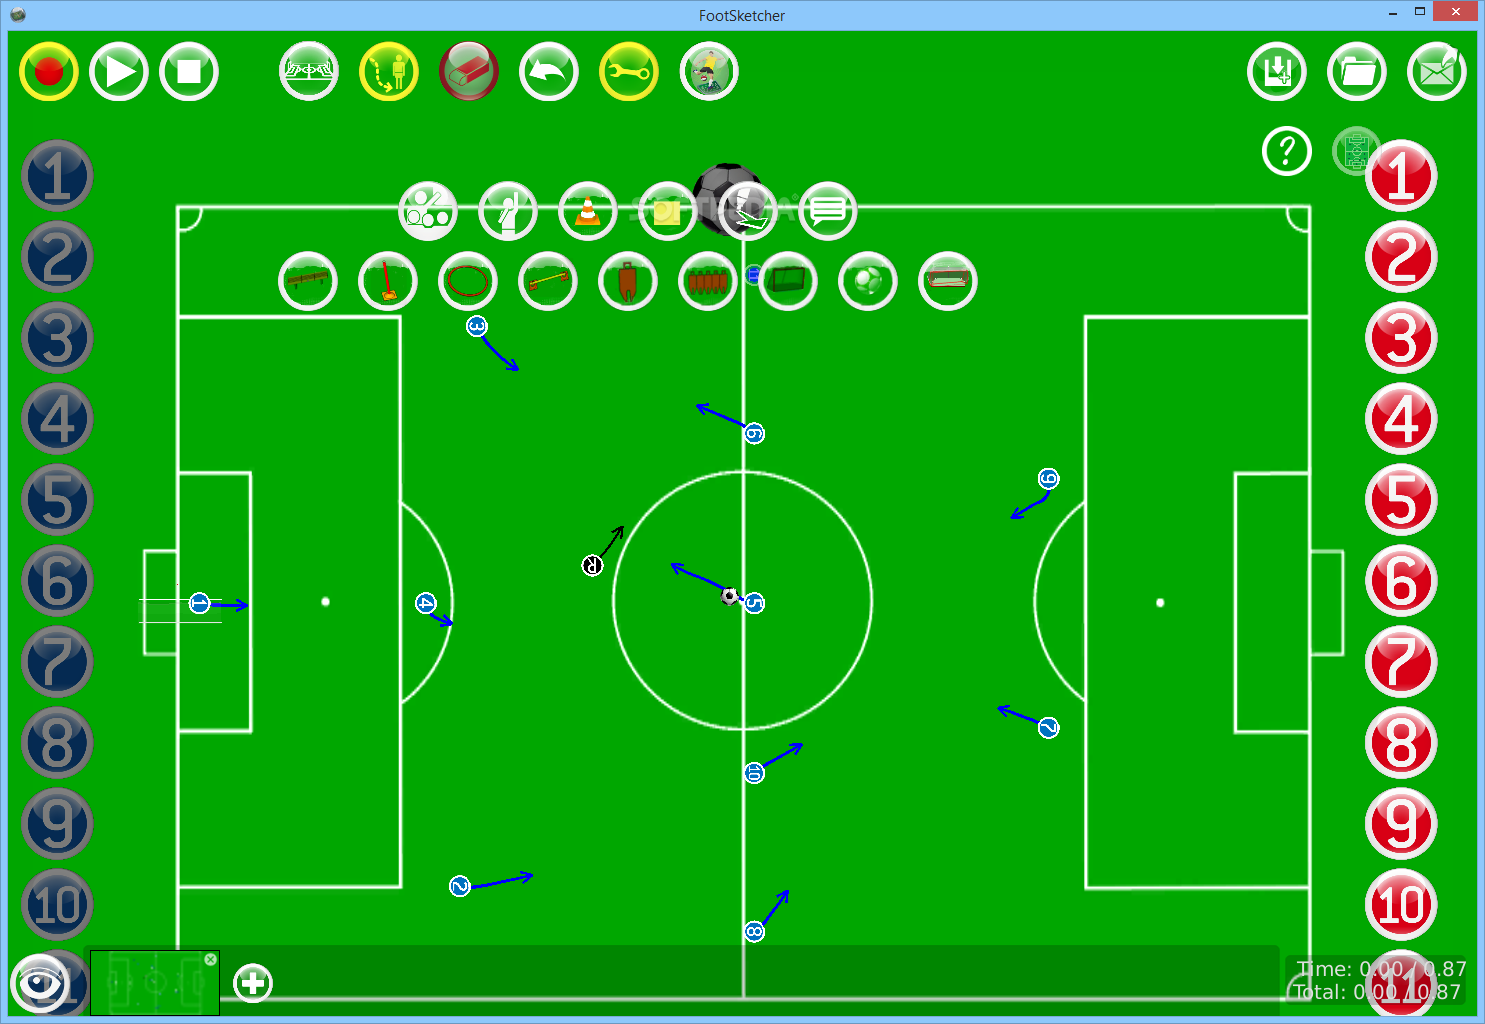 Tactic3D Football Software (formerly Tactic3D Viewer Football)